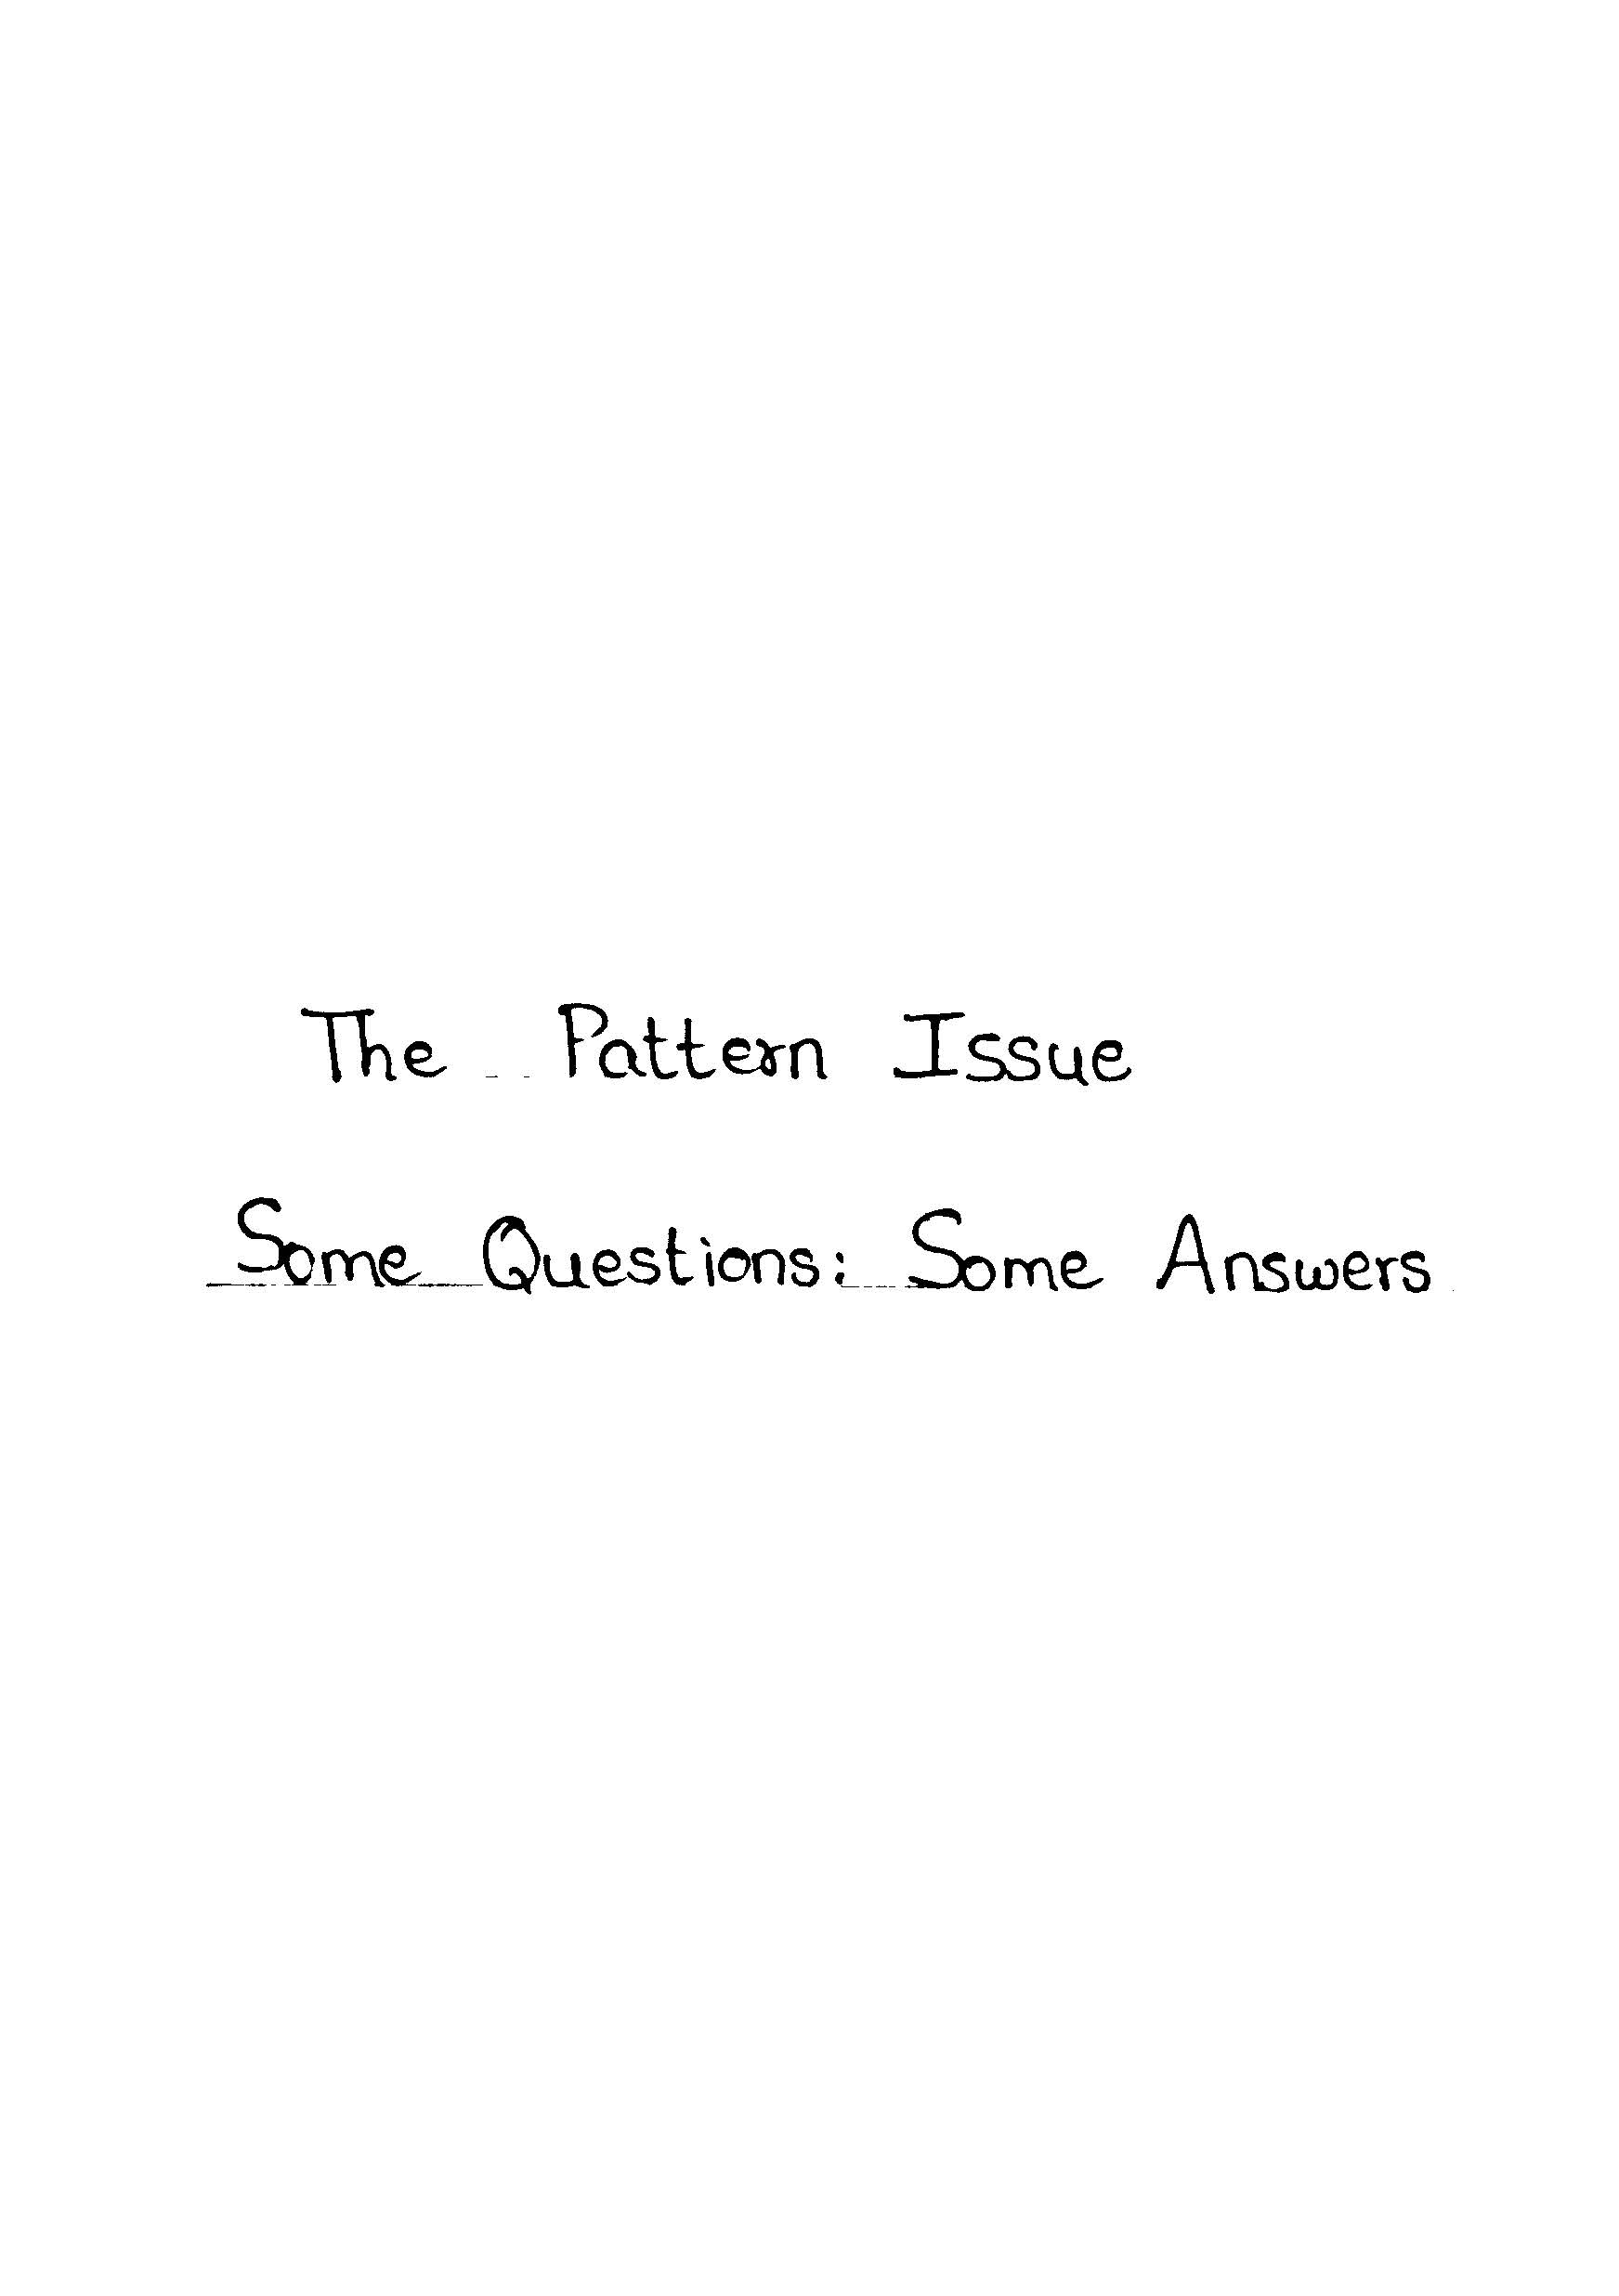 The pattern issue some questions:some answers